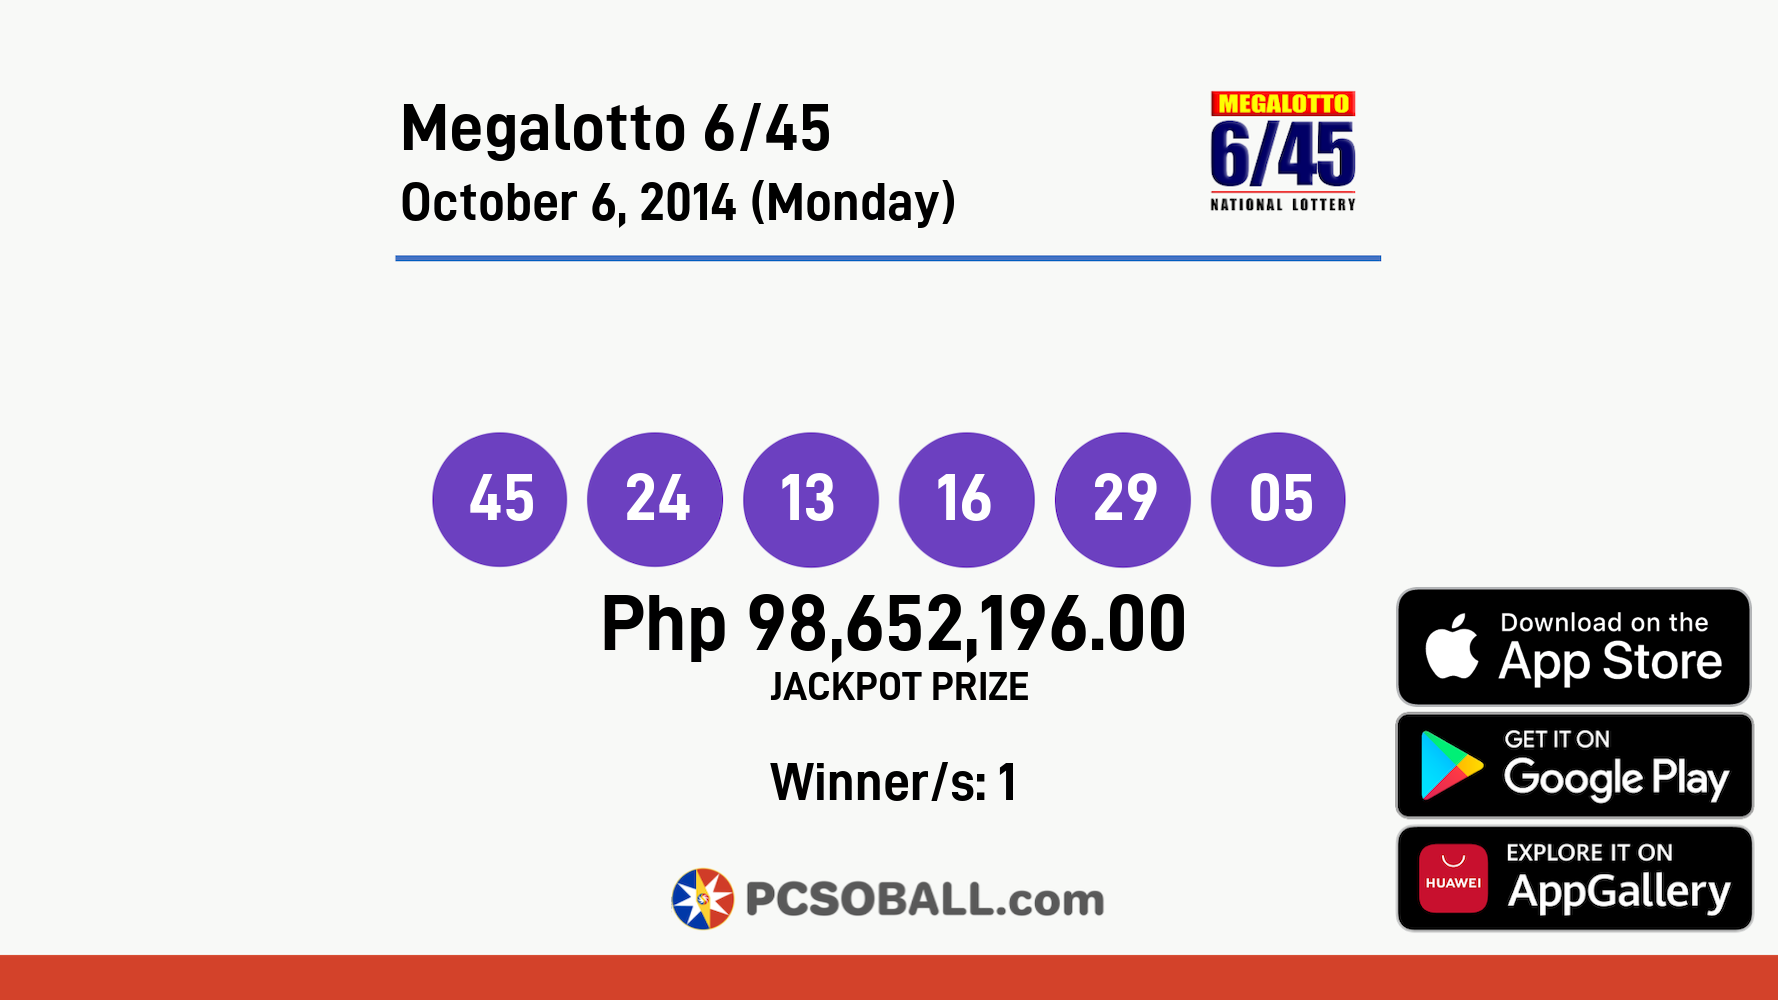 Megalotto 6/45 October 6, 2014 (Monday) Result